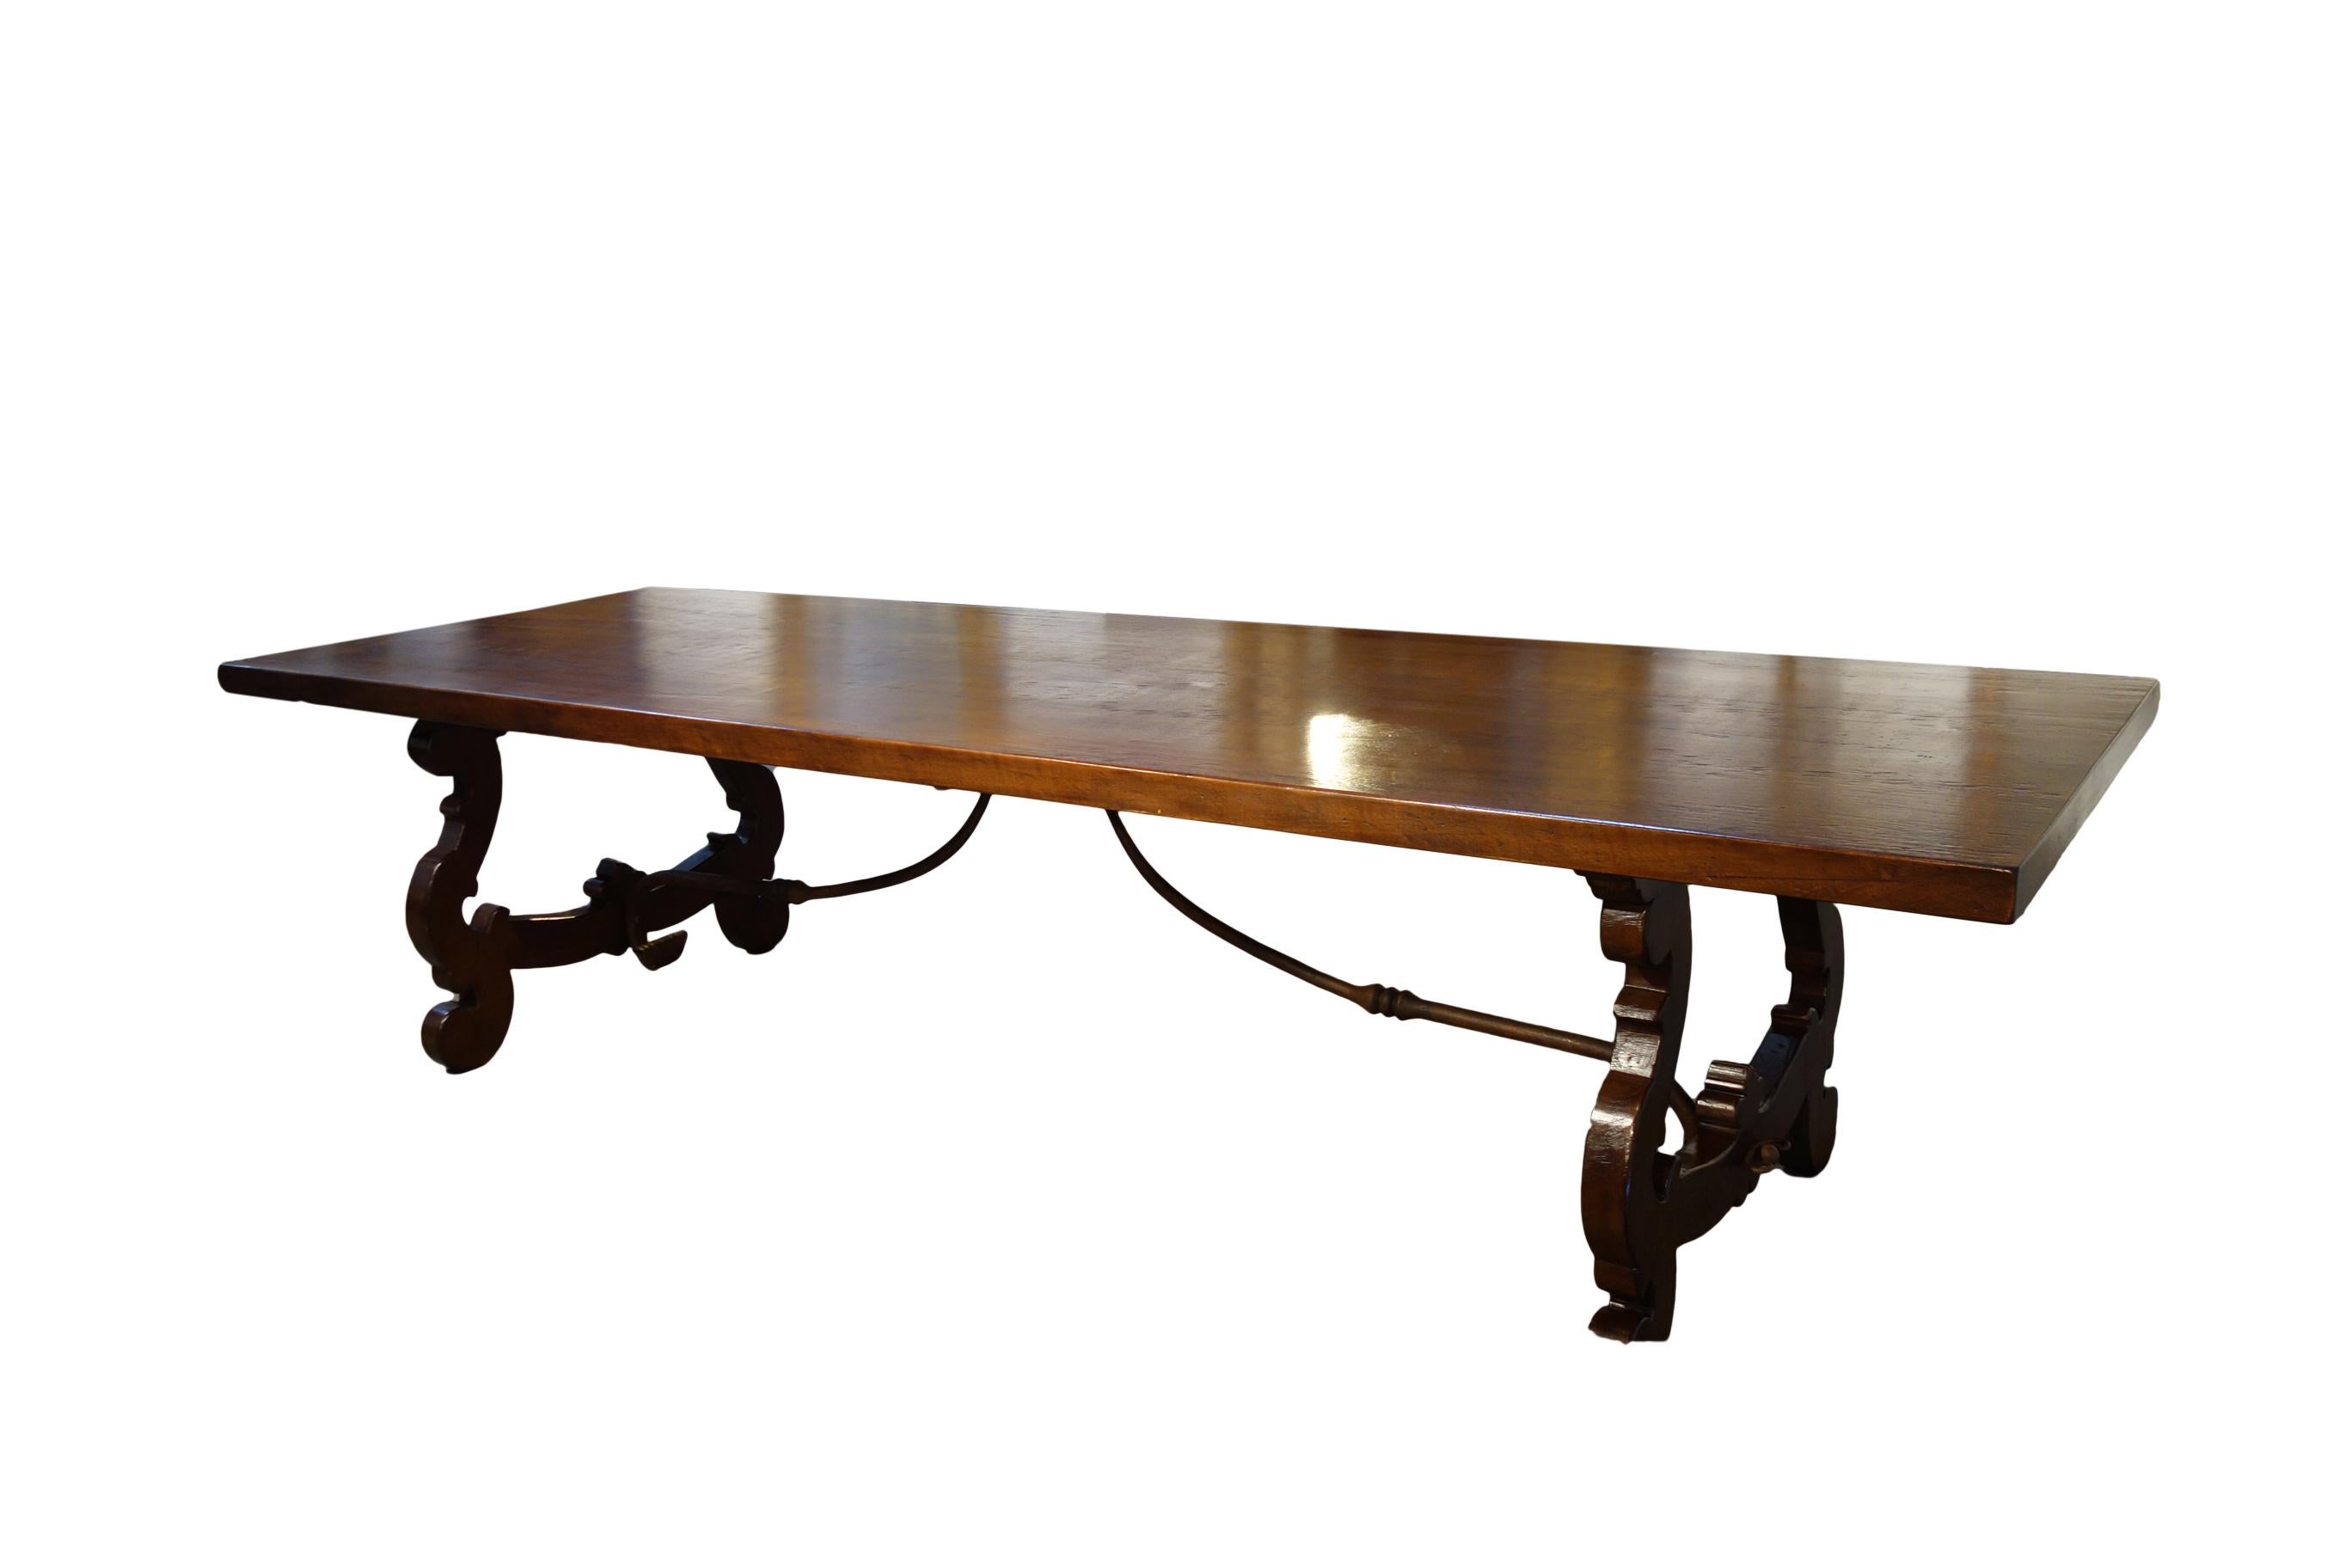 Our classic Lira Style dining table expands with extension leaves inserted in the table ends, offering an option for entertainment seating: Old Walnut Refectory table with lyre-shaped bases, handcrafted in aged Italian walnut, shown in Espresso Dark